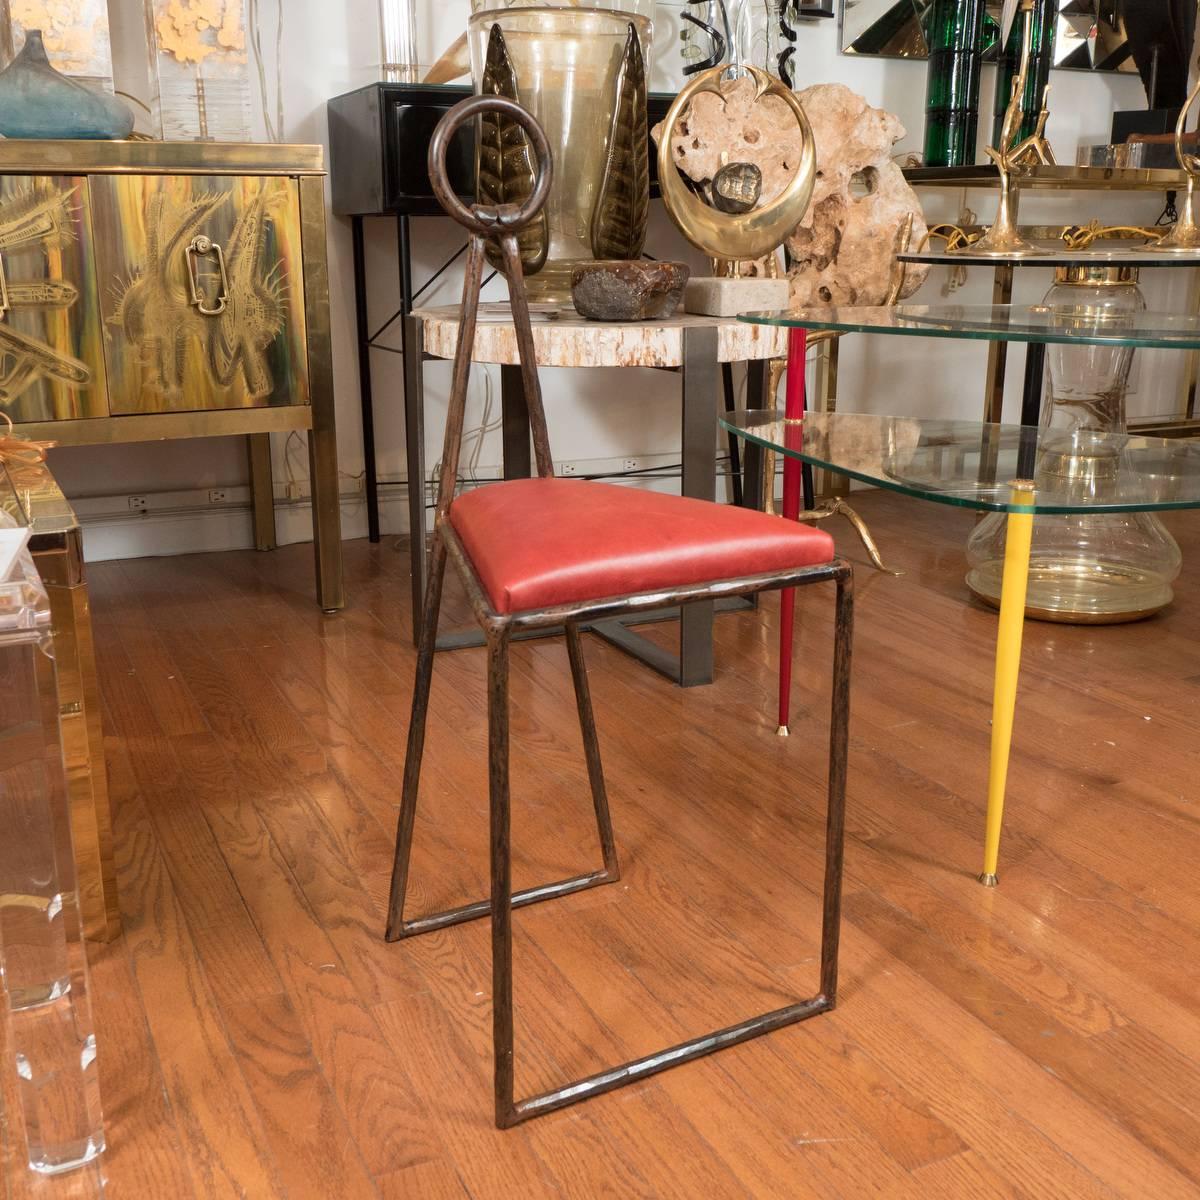 Pair of unusual iron stools with ring handle details.